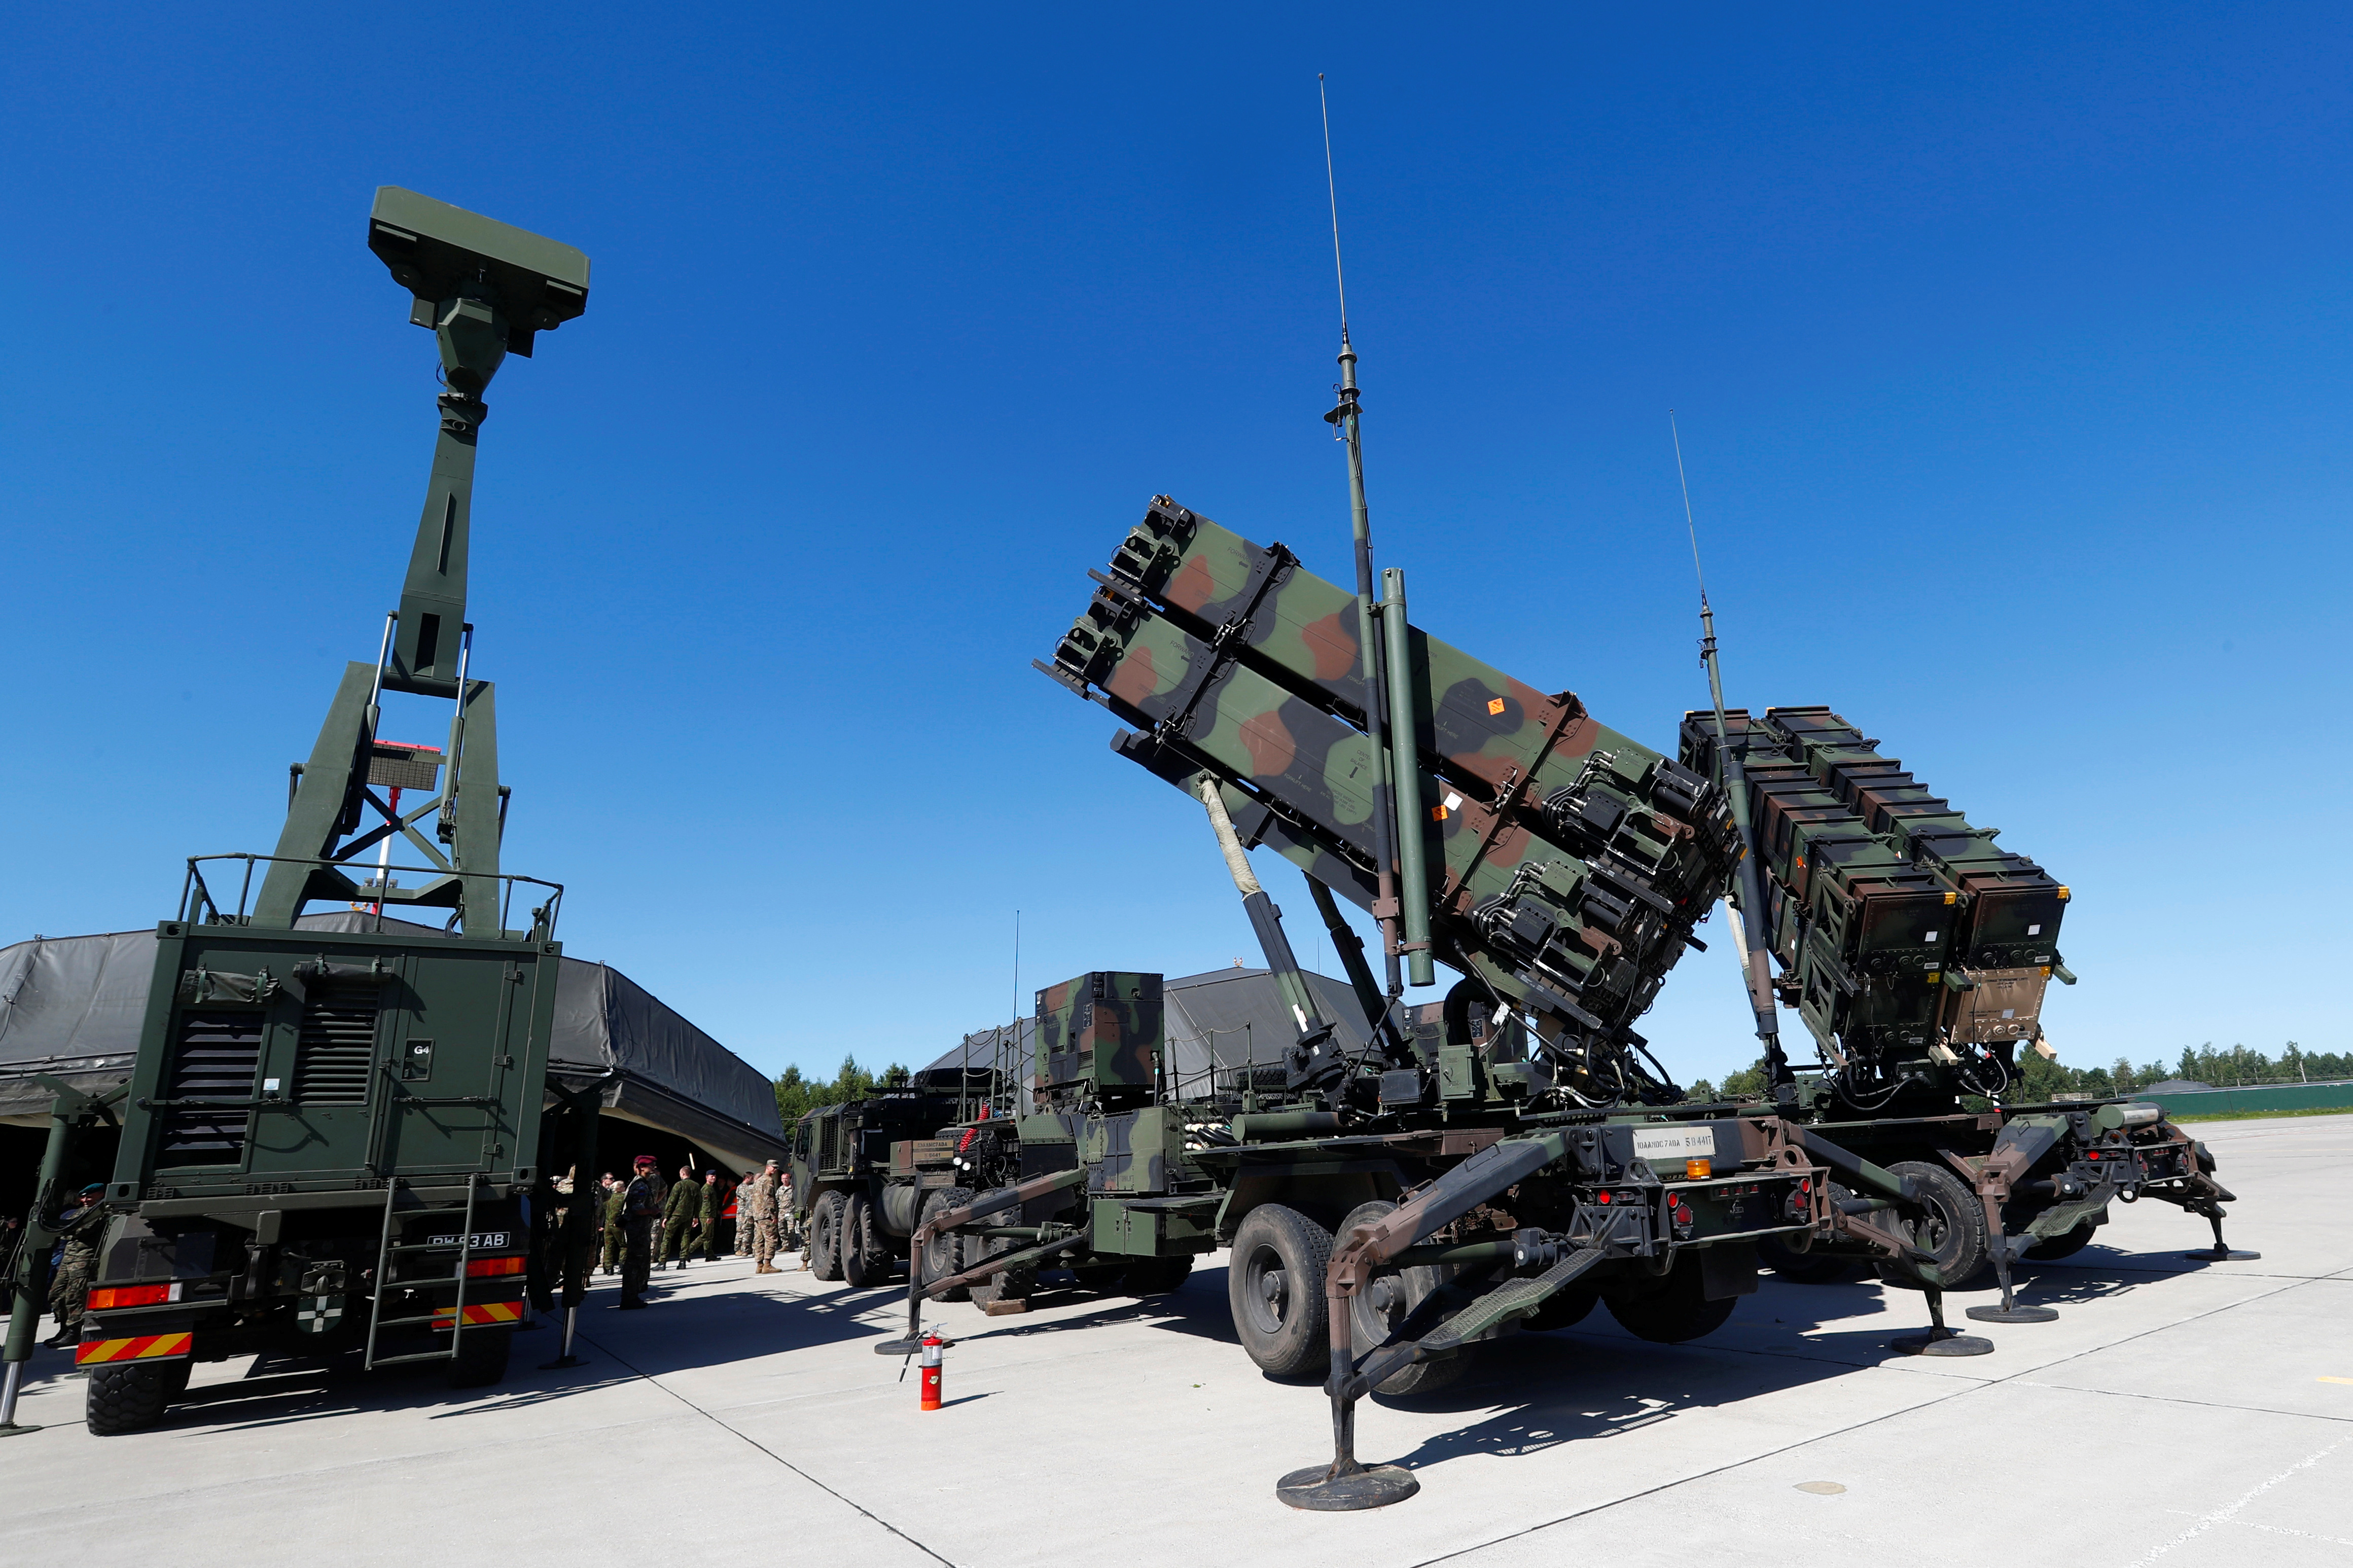 U.S. long range air defence systems Patriot and British radar Giraffe AMB are displayed during Toburq Legacy 2017 air defence exercise in the military airfield near Siauliai